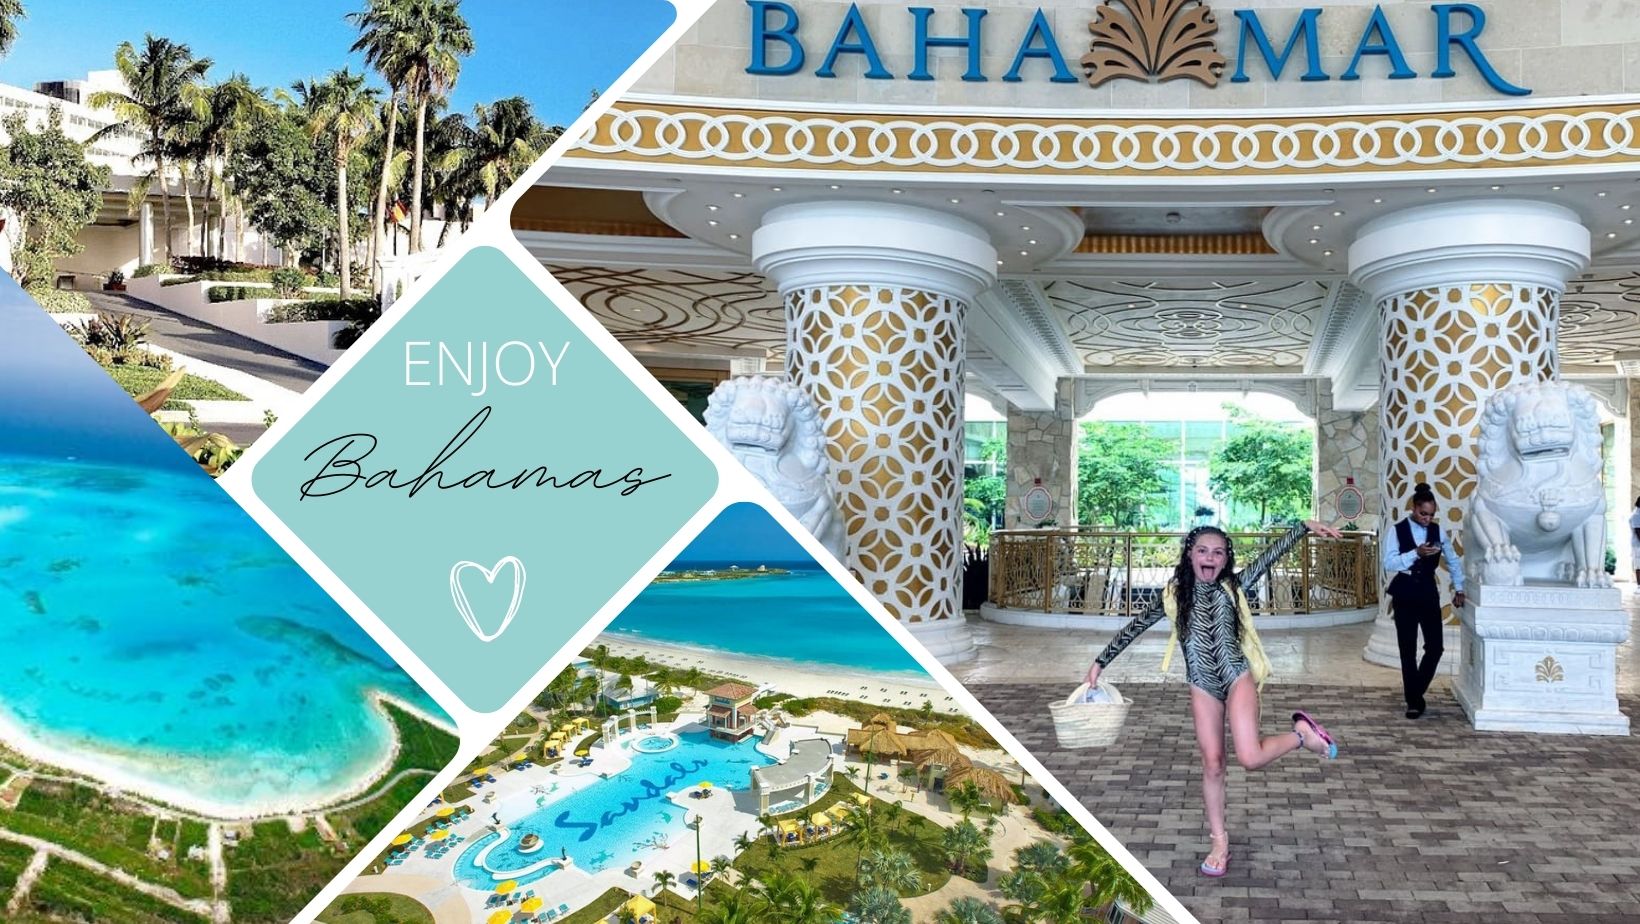 Best All-Inclusive Family Resorts in the Bahamas That Are Kid-Friendly